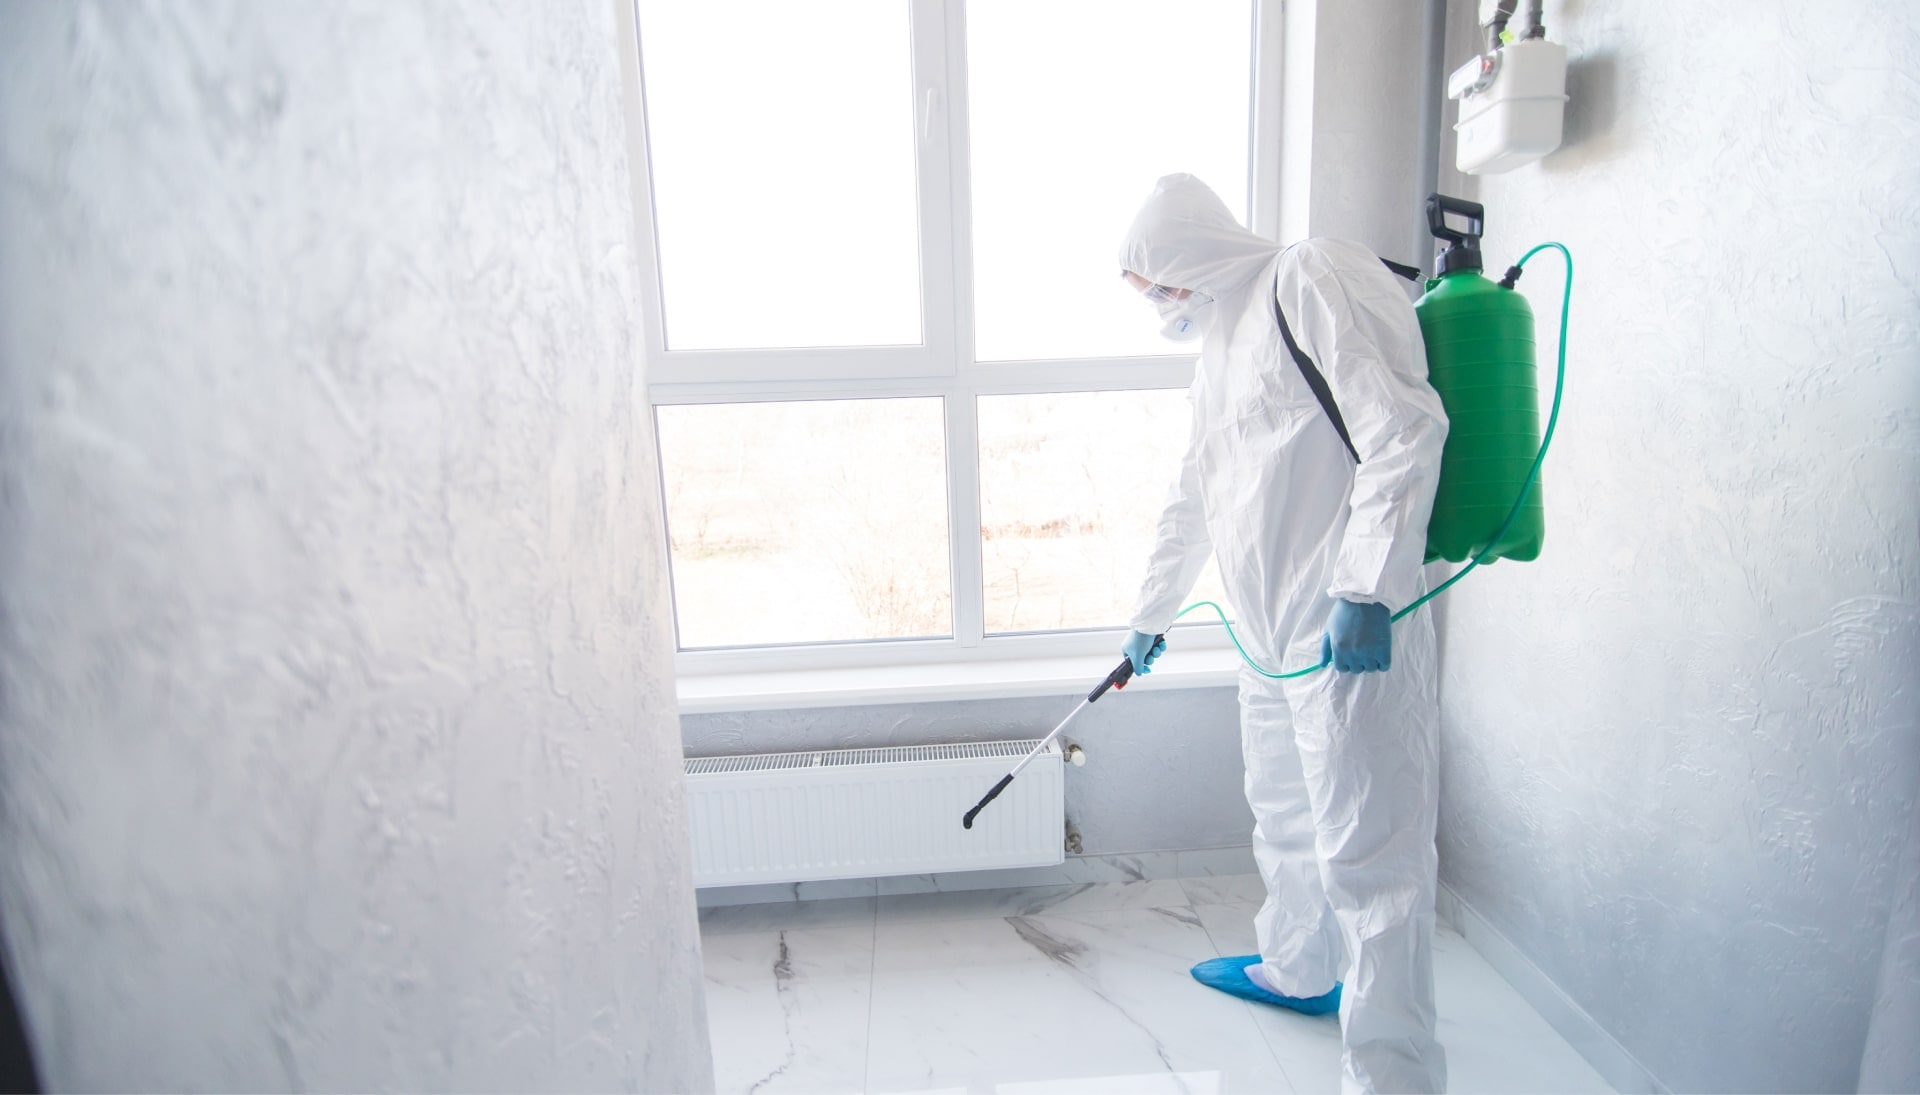 We provide the highest-quality mold inspection, testing, and removal services in the Milwaukee, Wisconsin area.